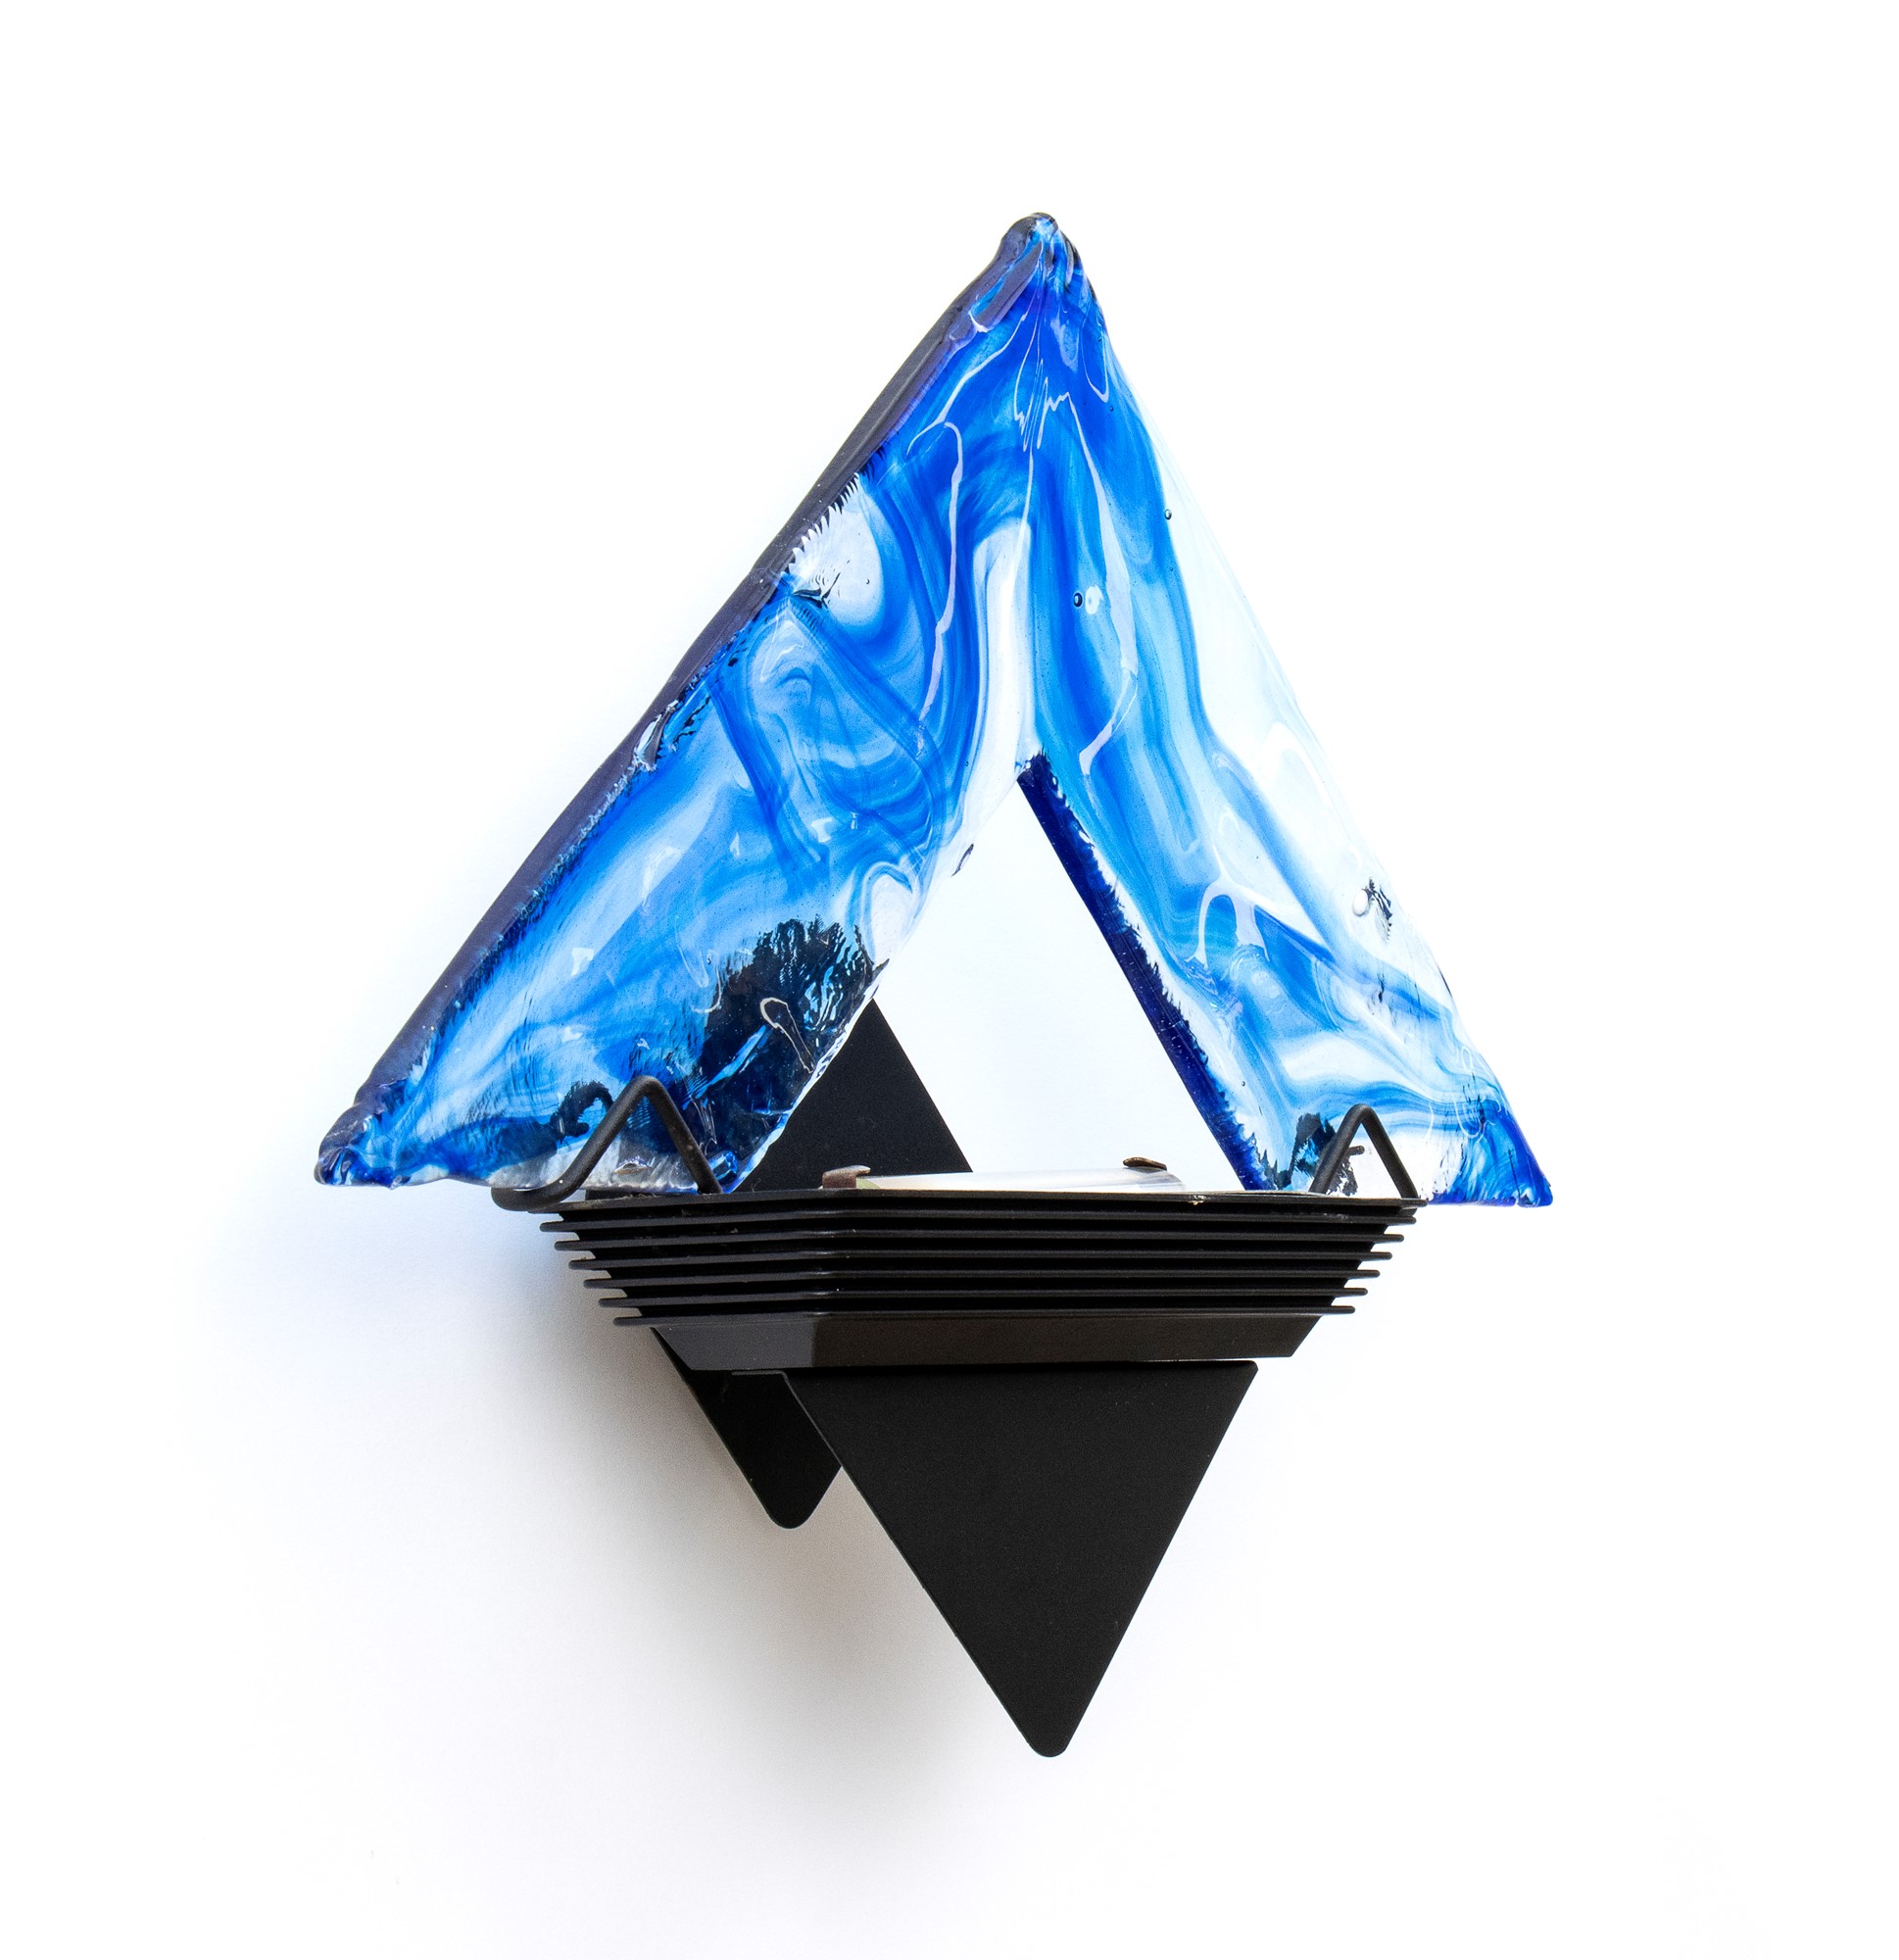 La Murrina wing lamp in hand blown Murano glass mounted on a triangular frame - Image 12 of 27